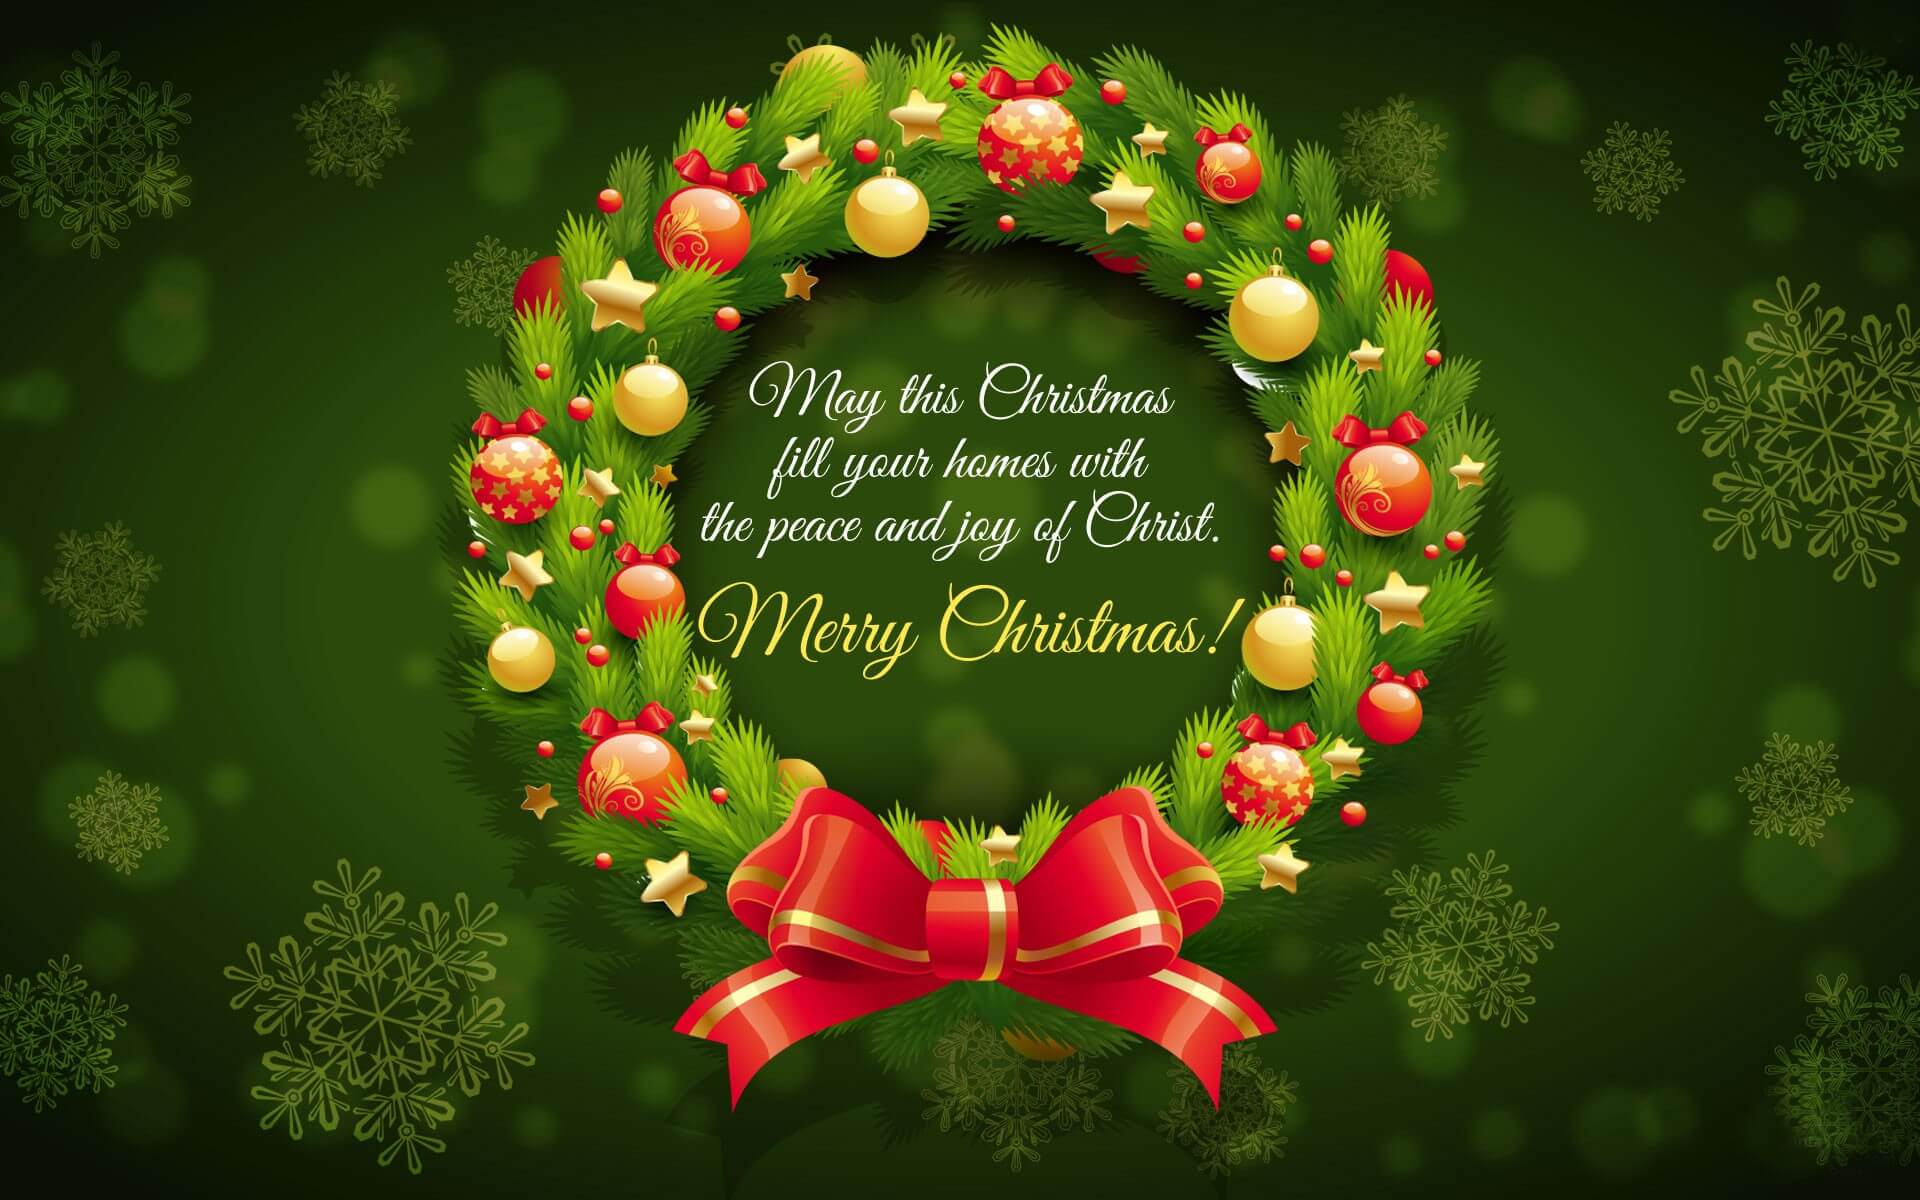 Merry Christmas Wishes Text 2015 Christmas Wishes Text - Merry Christmas Wishes - HD Wallpaper 